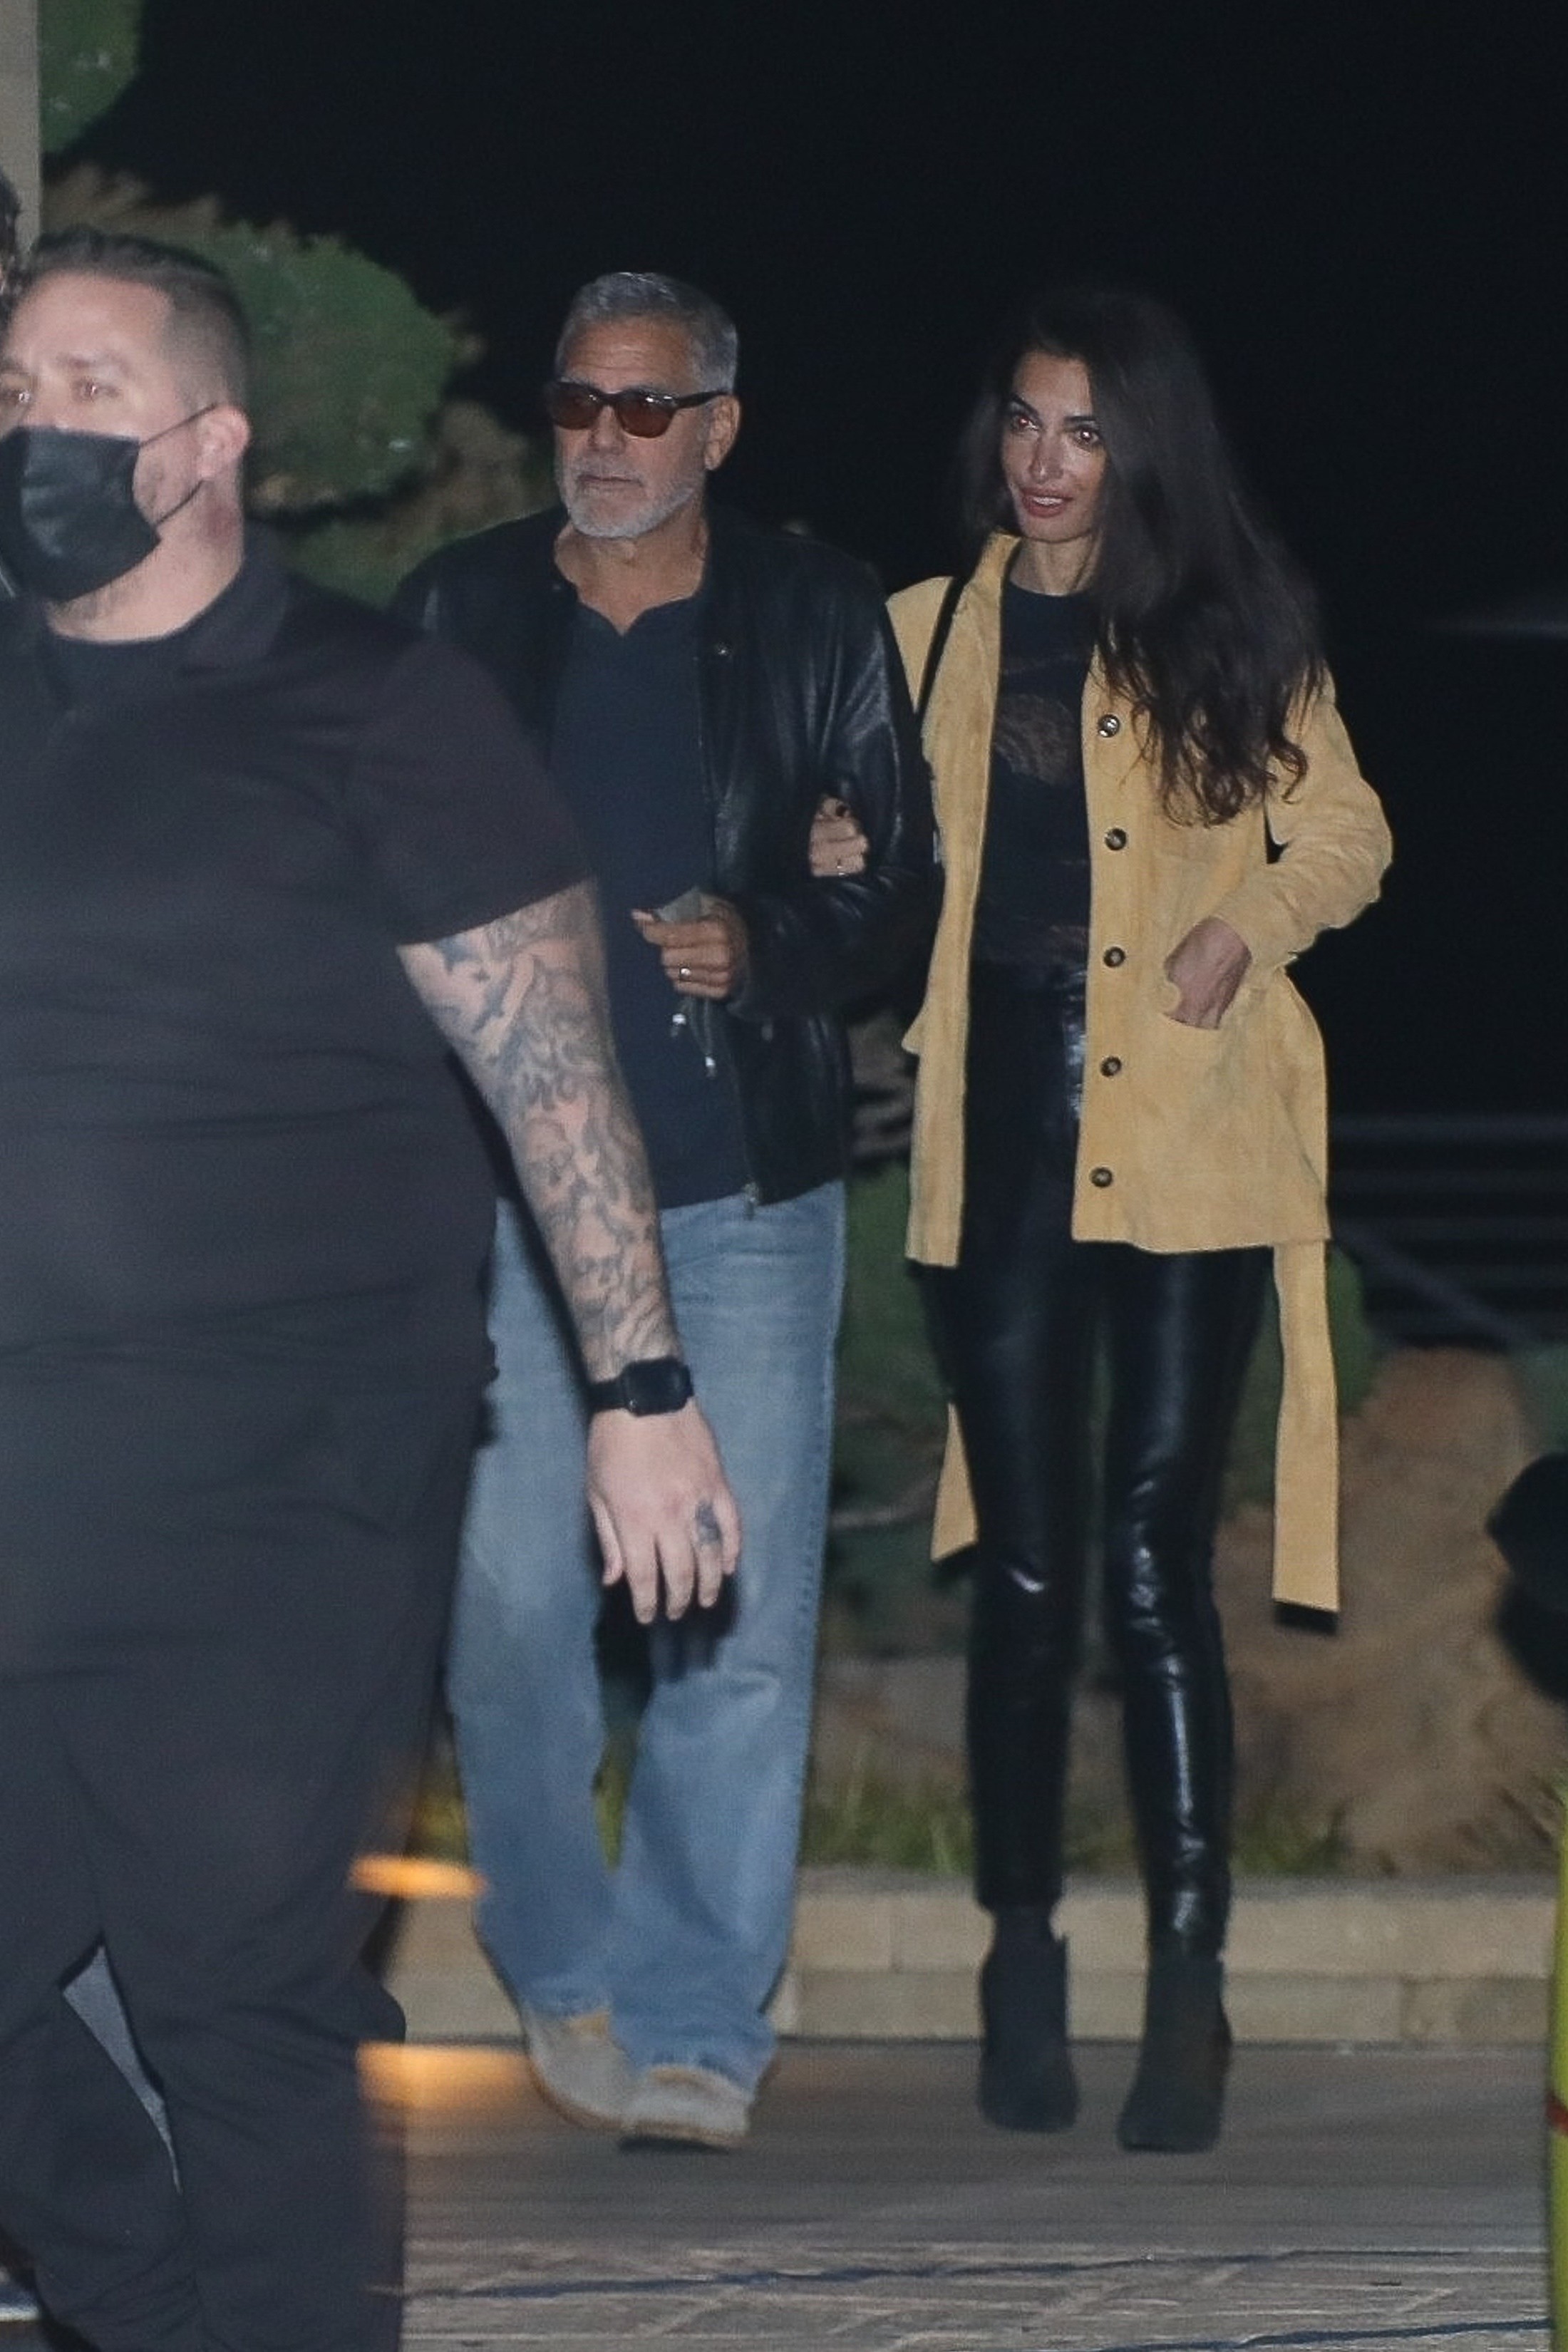 Photo © 2022 Backgrid/The Grosby Group19 JANUARY 2022 Malibu, CA  - *EXCLUSIVE*  -George Clooney and Amal Clooney enjoy dinner at Nobu with Cindy Crawford and Rande Gerber on Tuesday night. The group is all smiles as they hug goodbye before getting in (Foto: Backgrid/The Grosby Group)